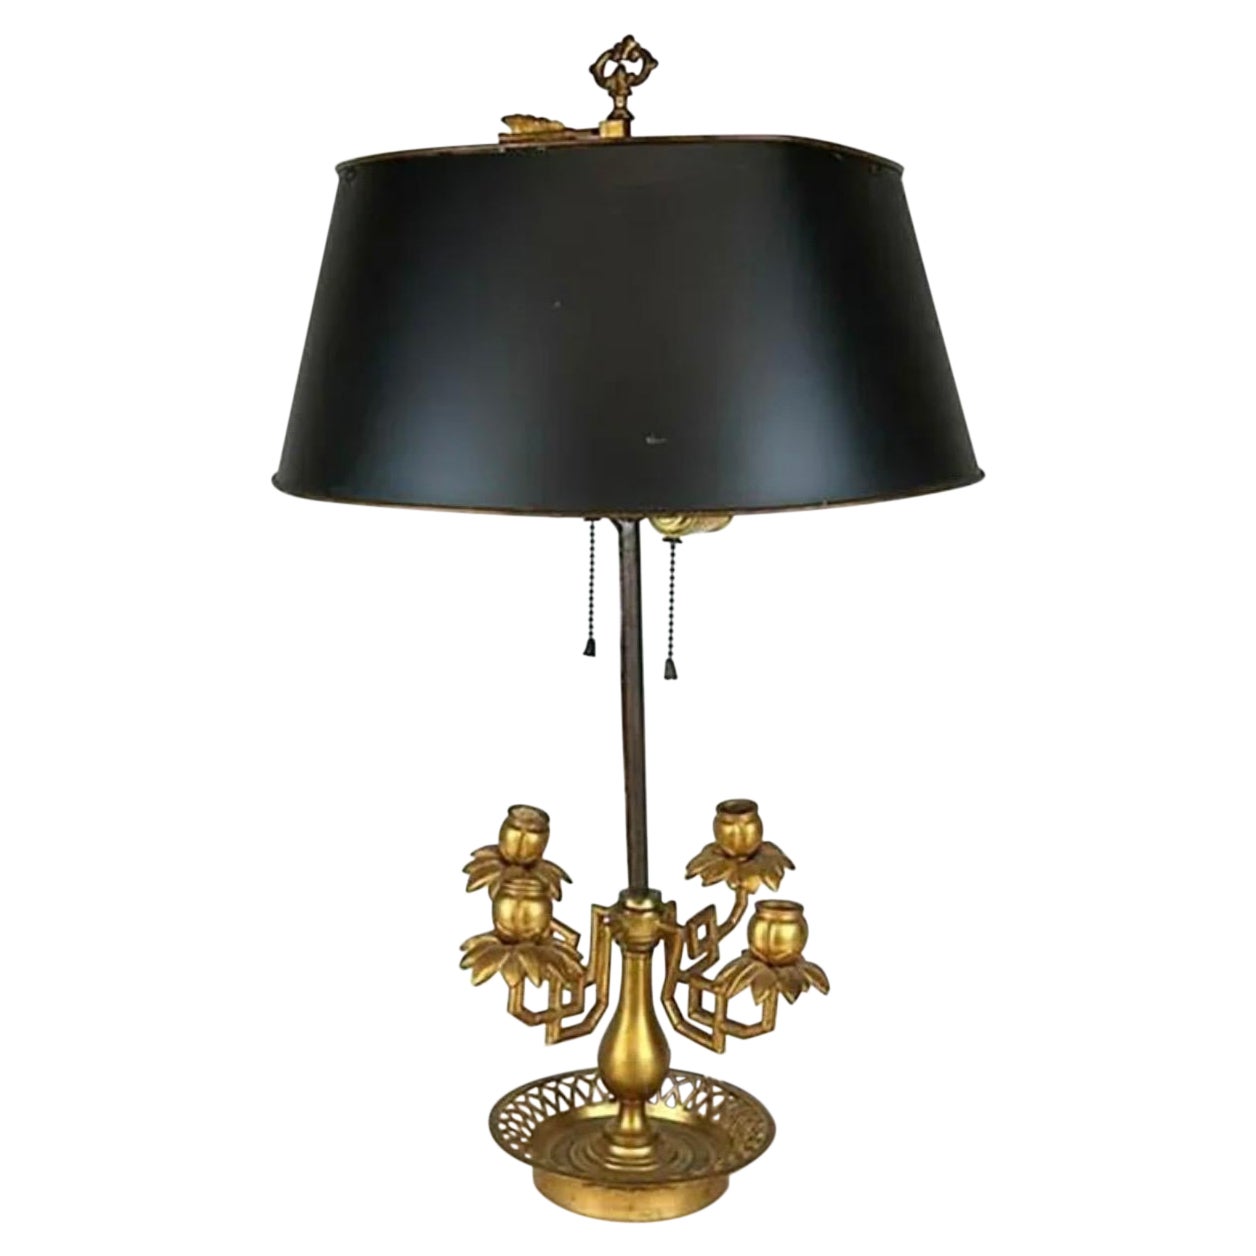 Wonderful French Dore Bronze Floral Basket Bouillotte Lamp Tole Shade